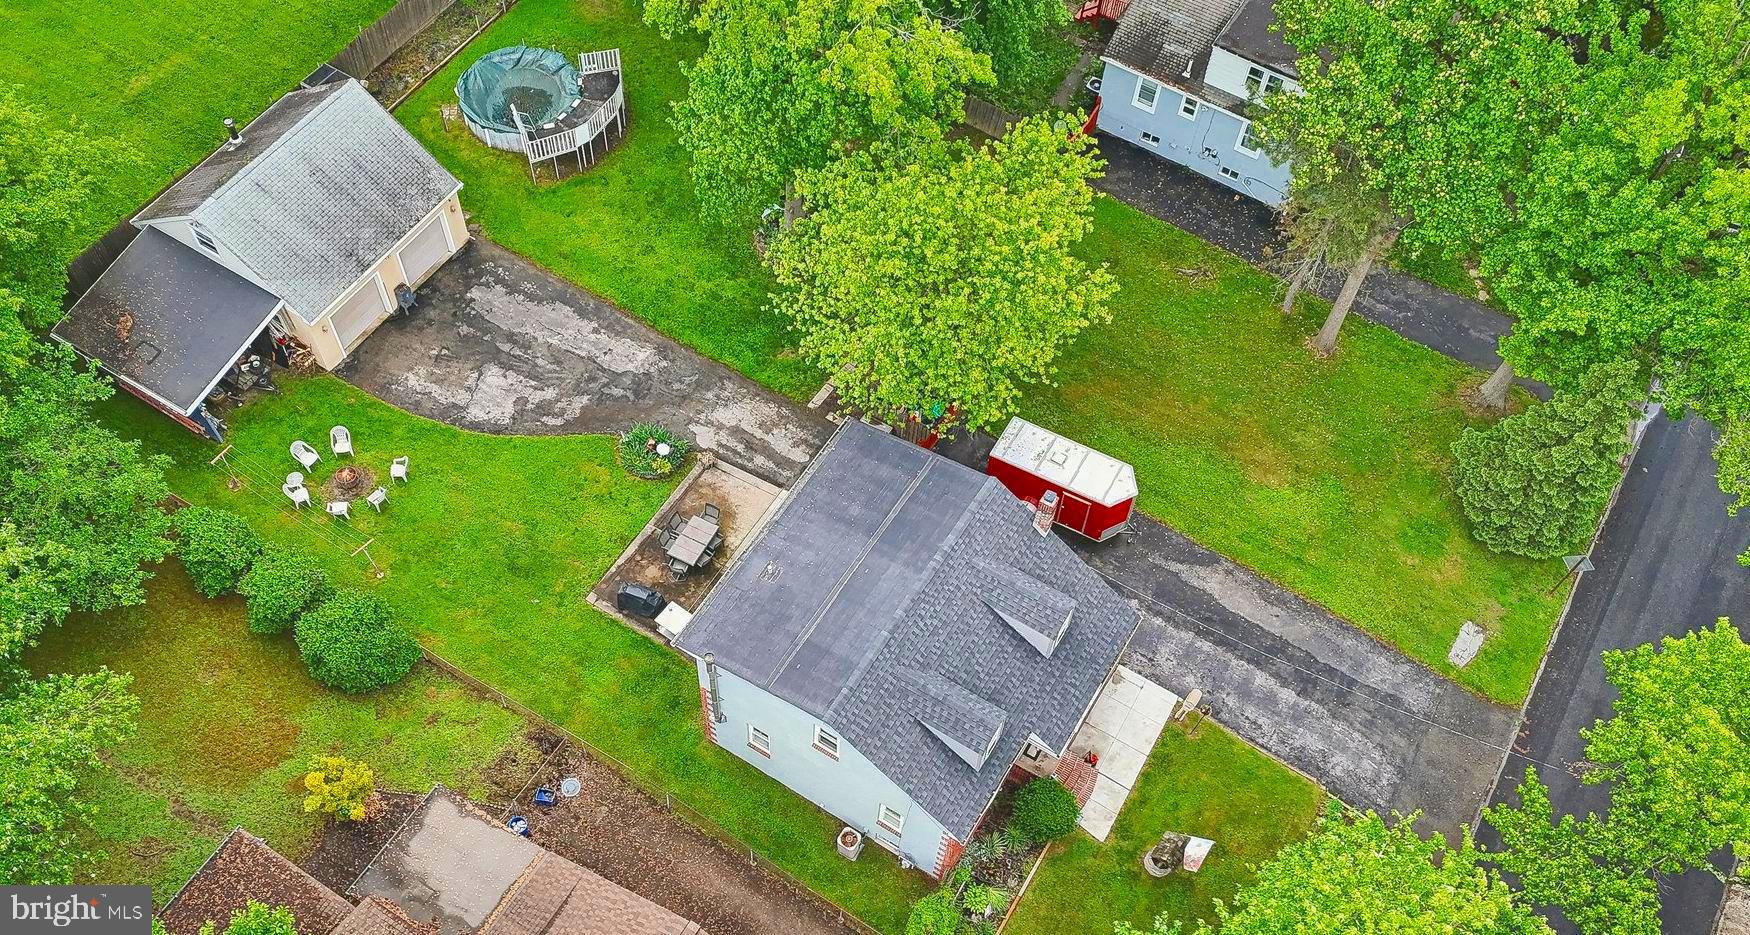 an aerial view of a house with pool yard and outdoor seating